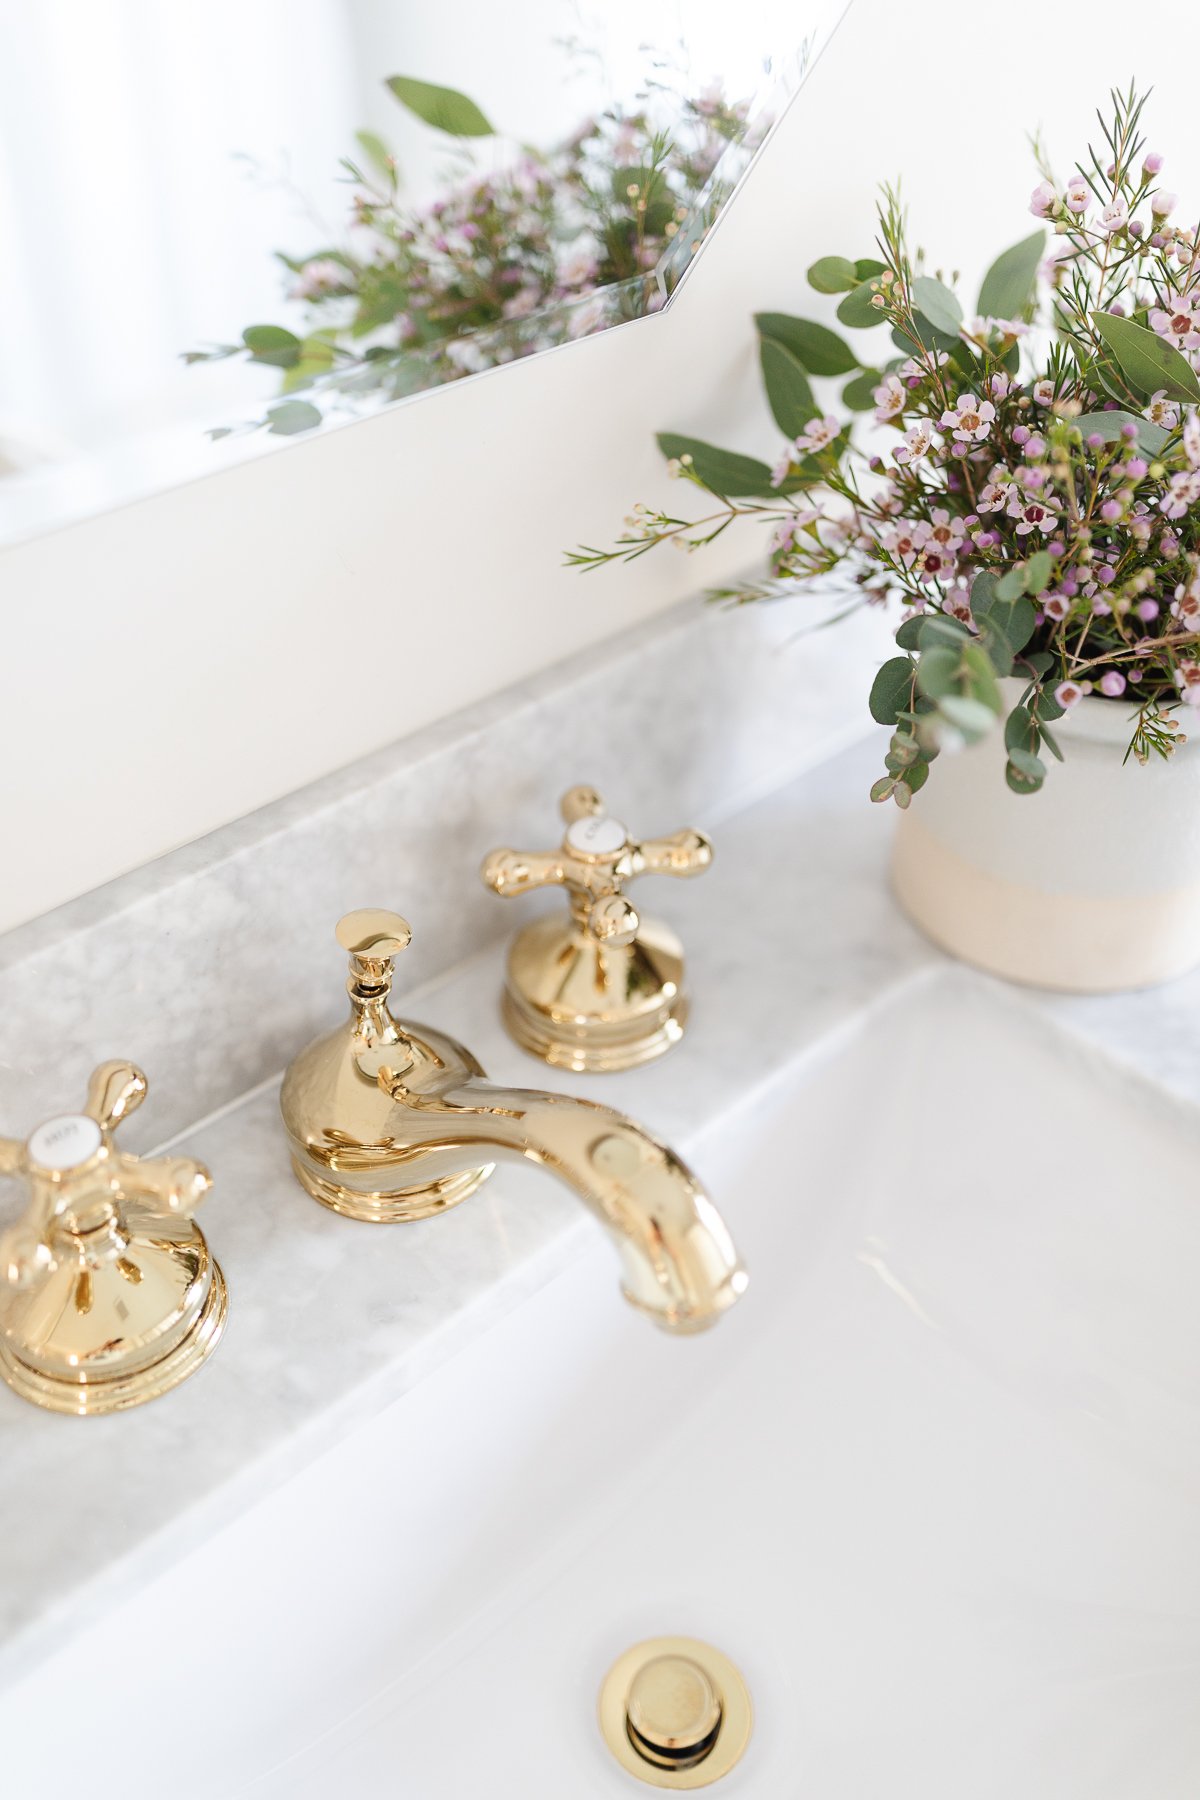 bathroom sink with flowers and brass faucet